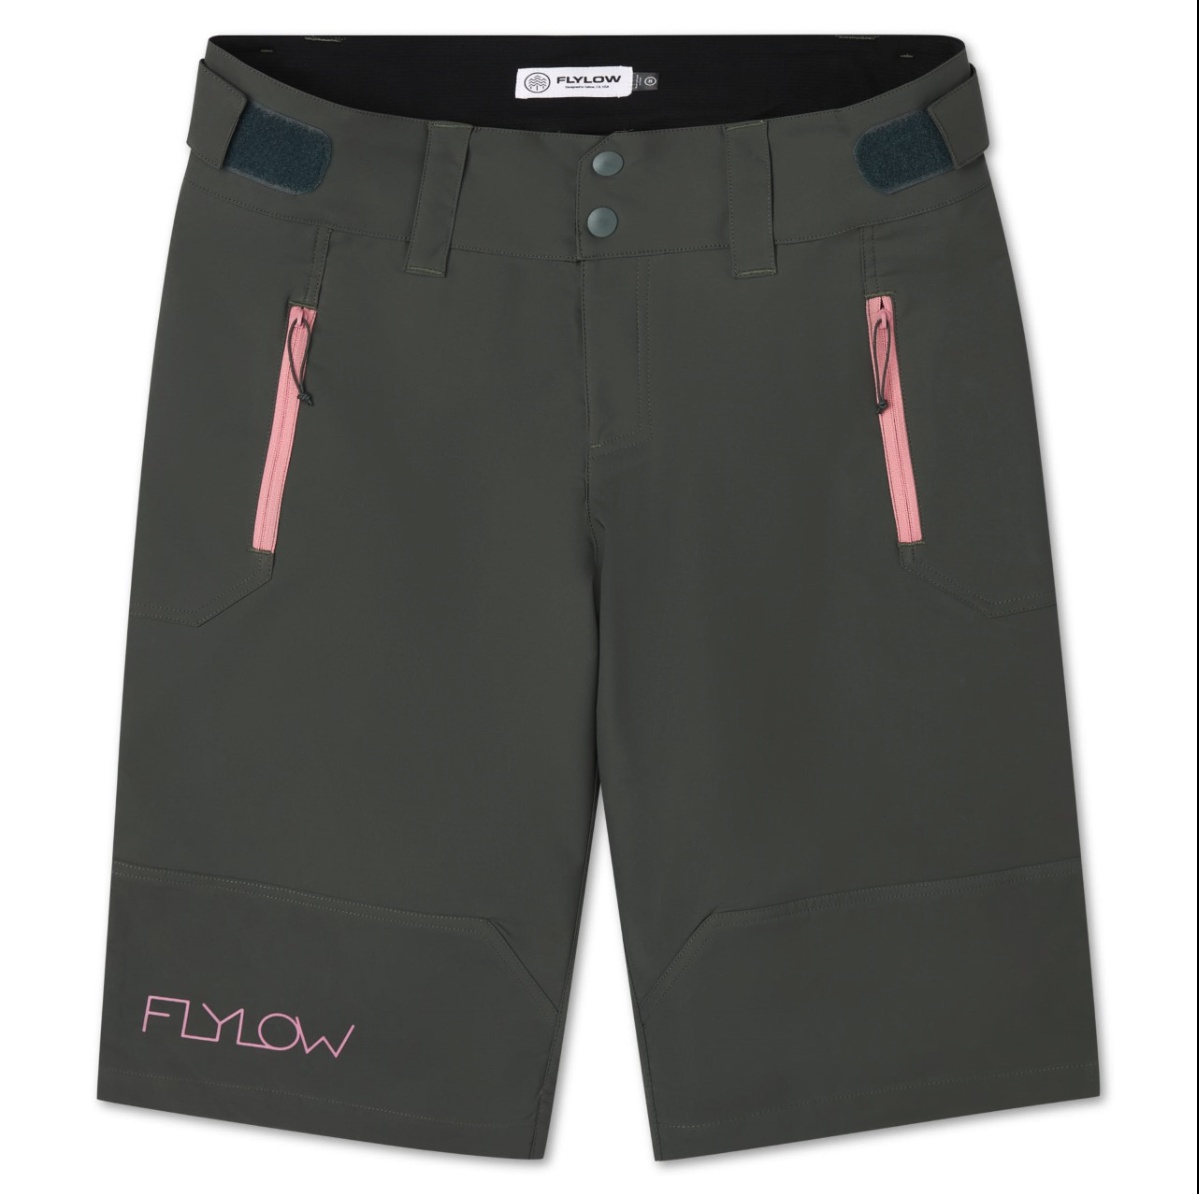 Flylow Gear Eleanor Shorts Review